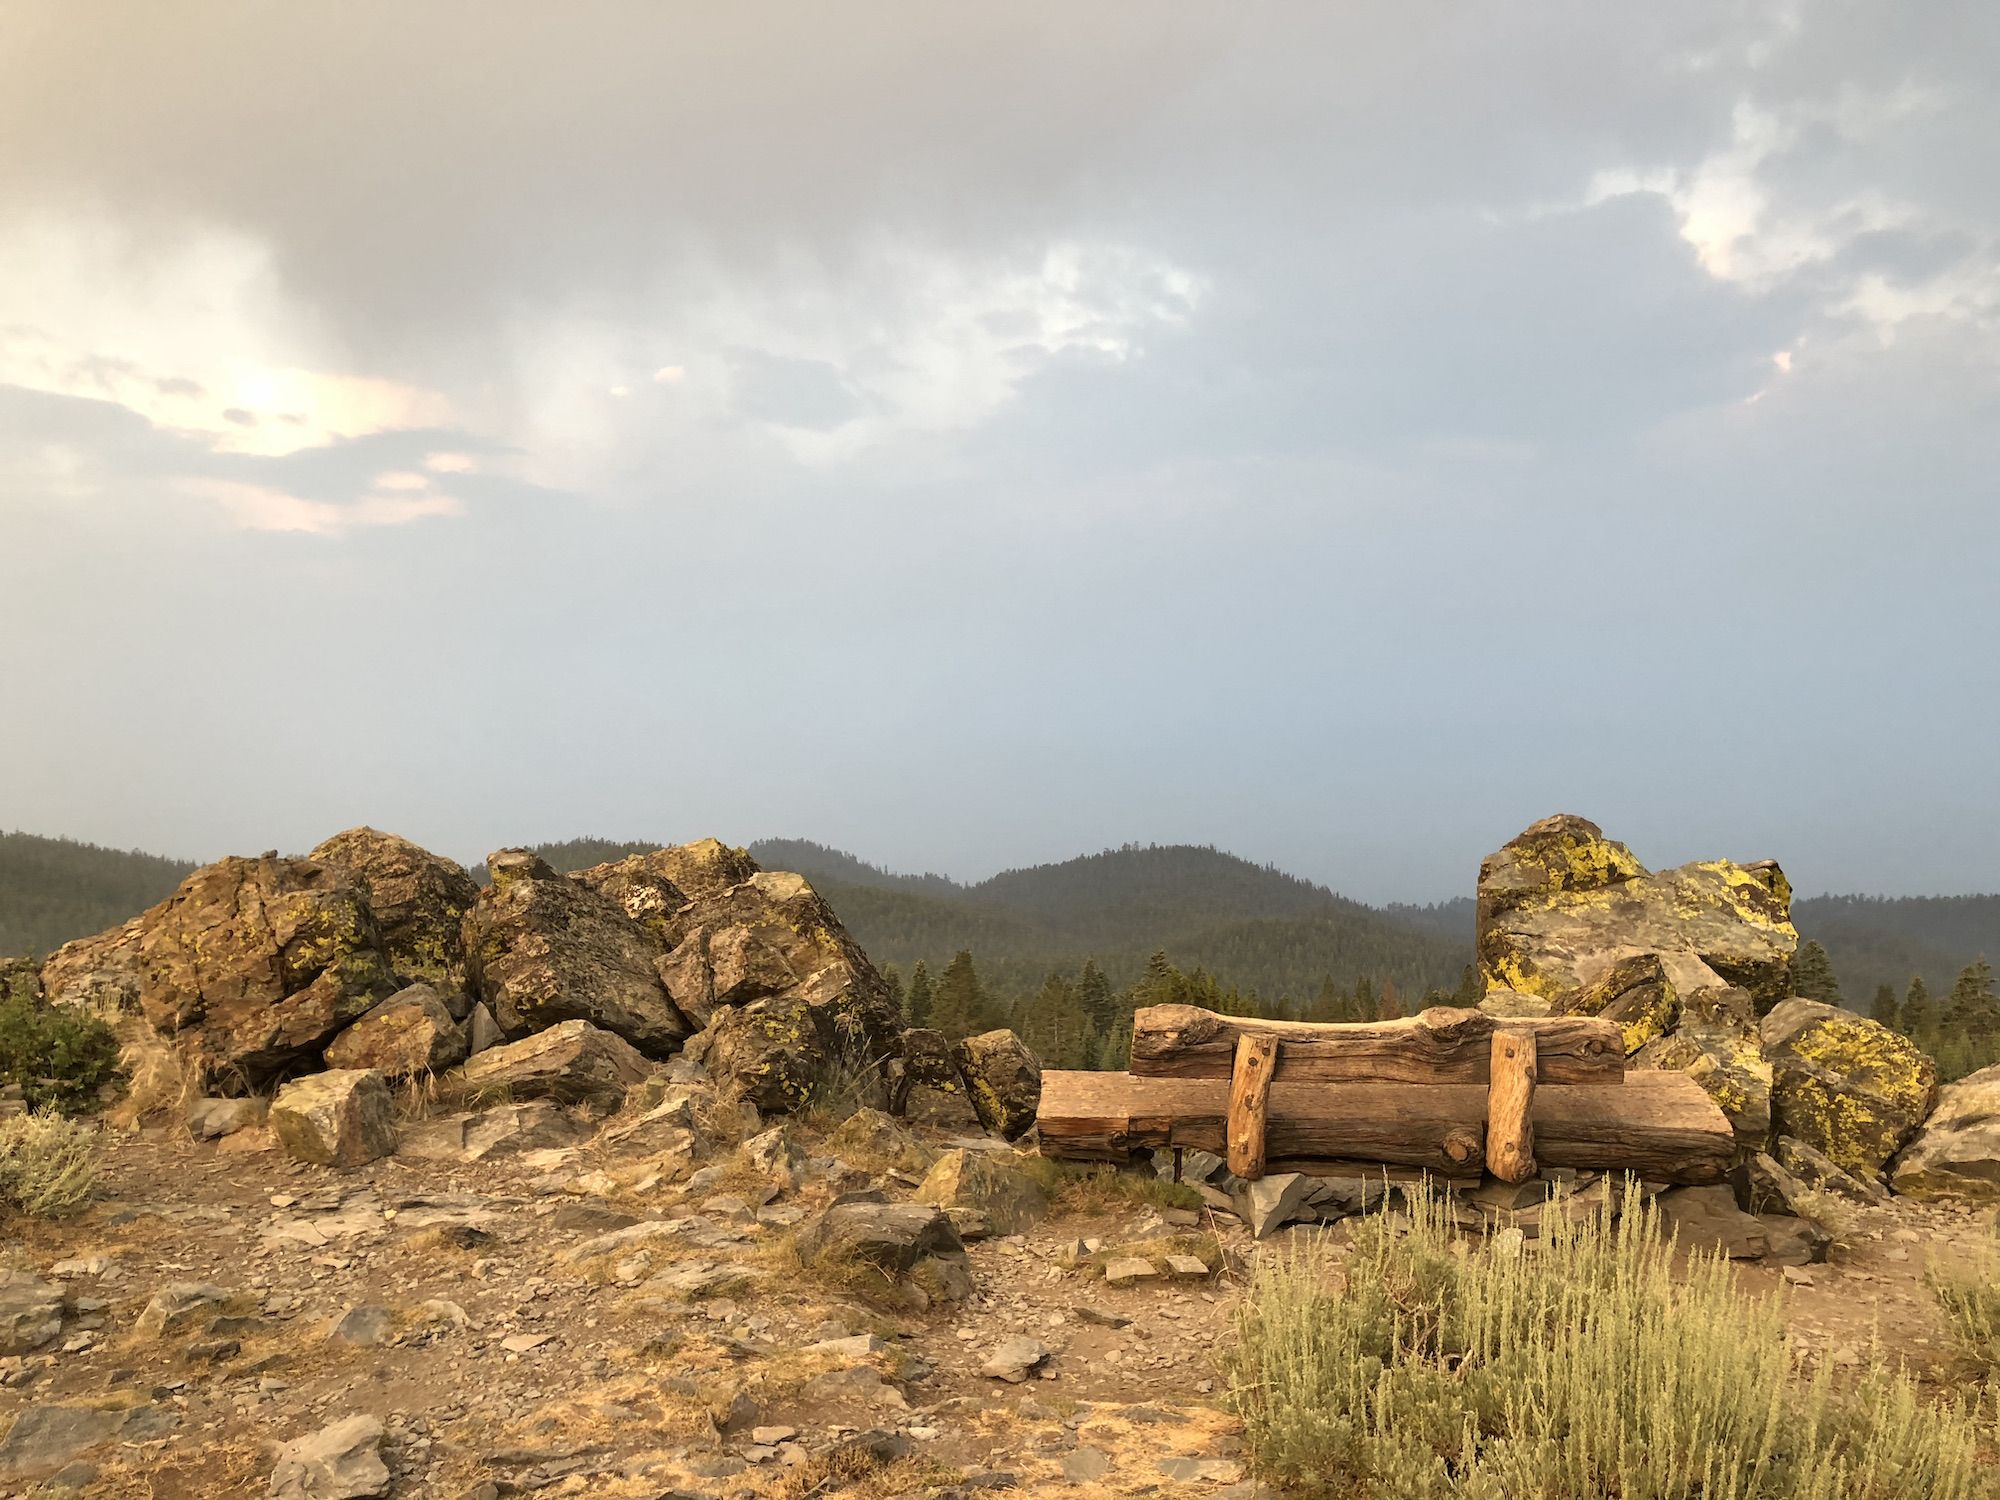 The iconic Tahoe Rim Trail bench overlooking a smoky horizon